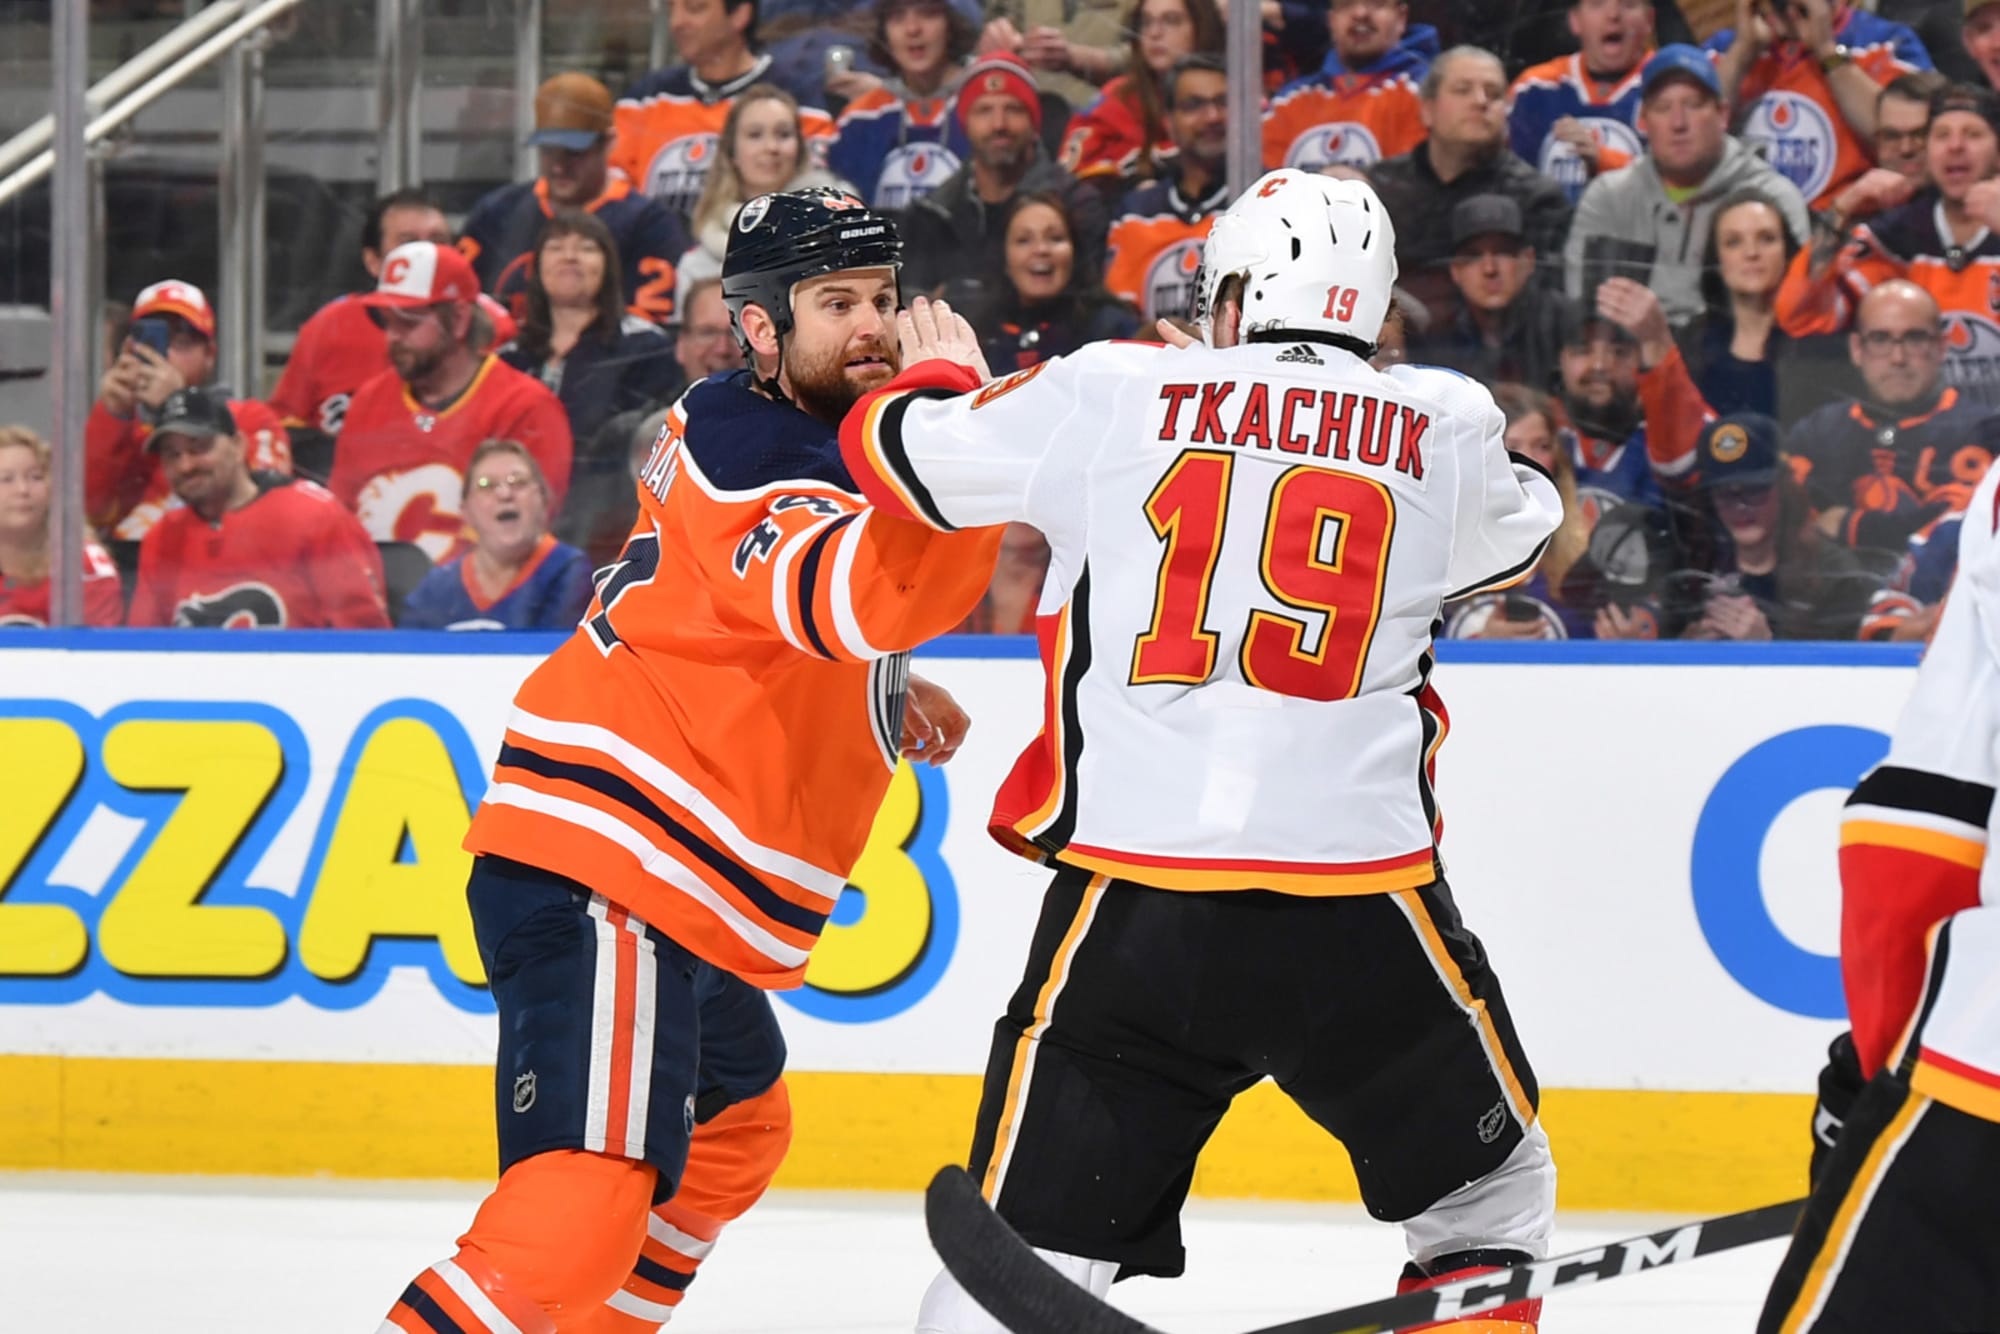 Oilers and Flames rivalry shows why fighting should stay